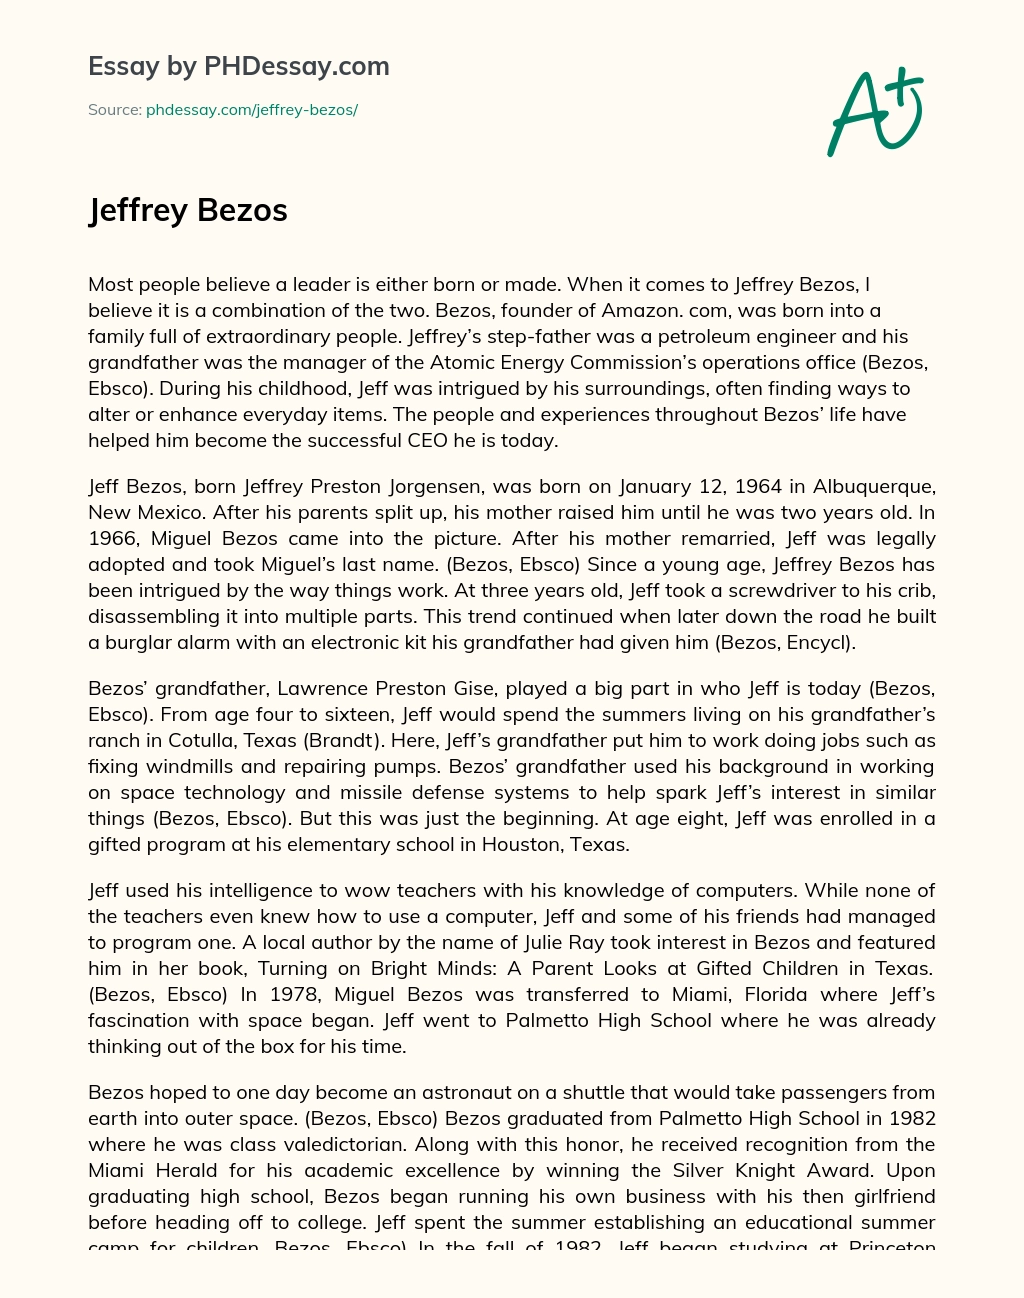 Jeff Bezos: Born and Made Leader with a Fascination for Innovation essay